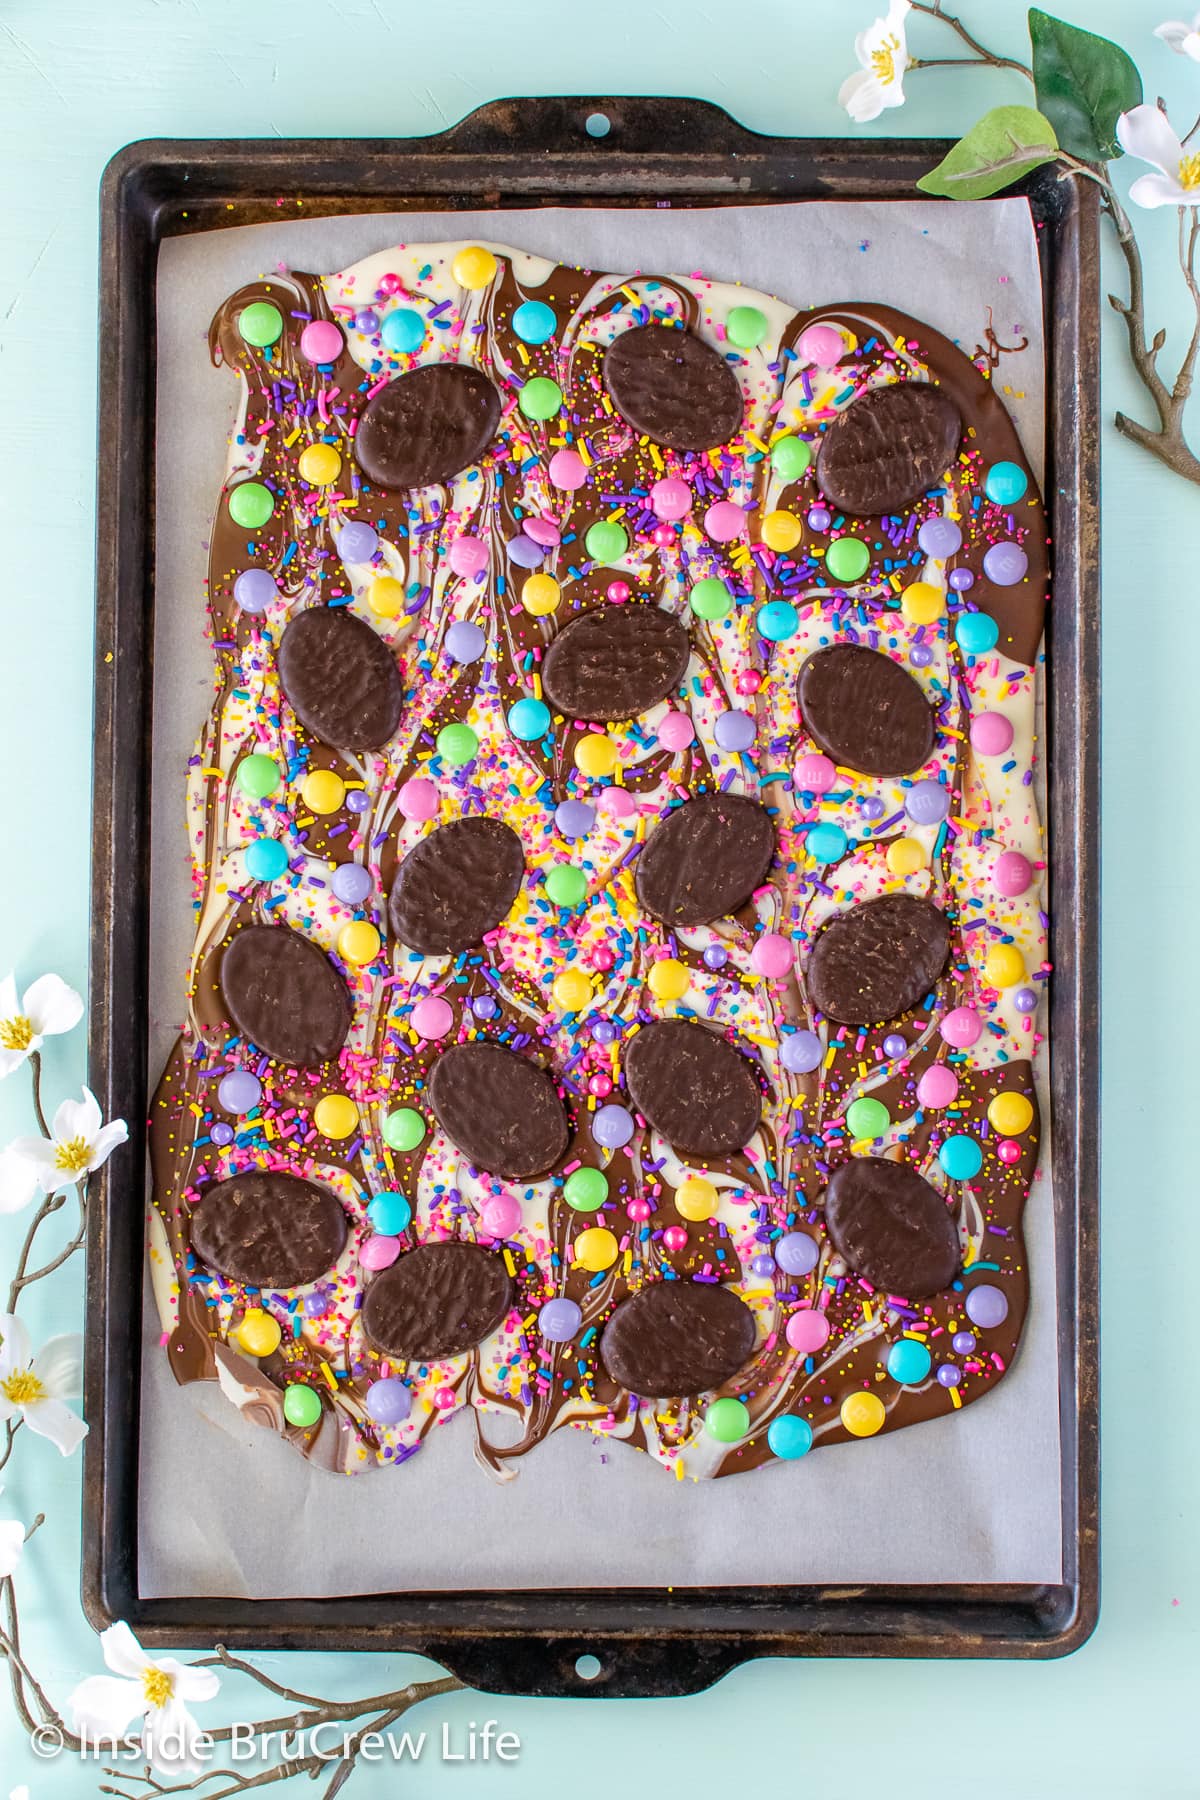 A pan of swirled chocolate bark topped with candies and sprinkles.